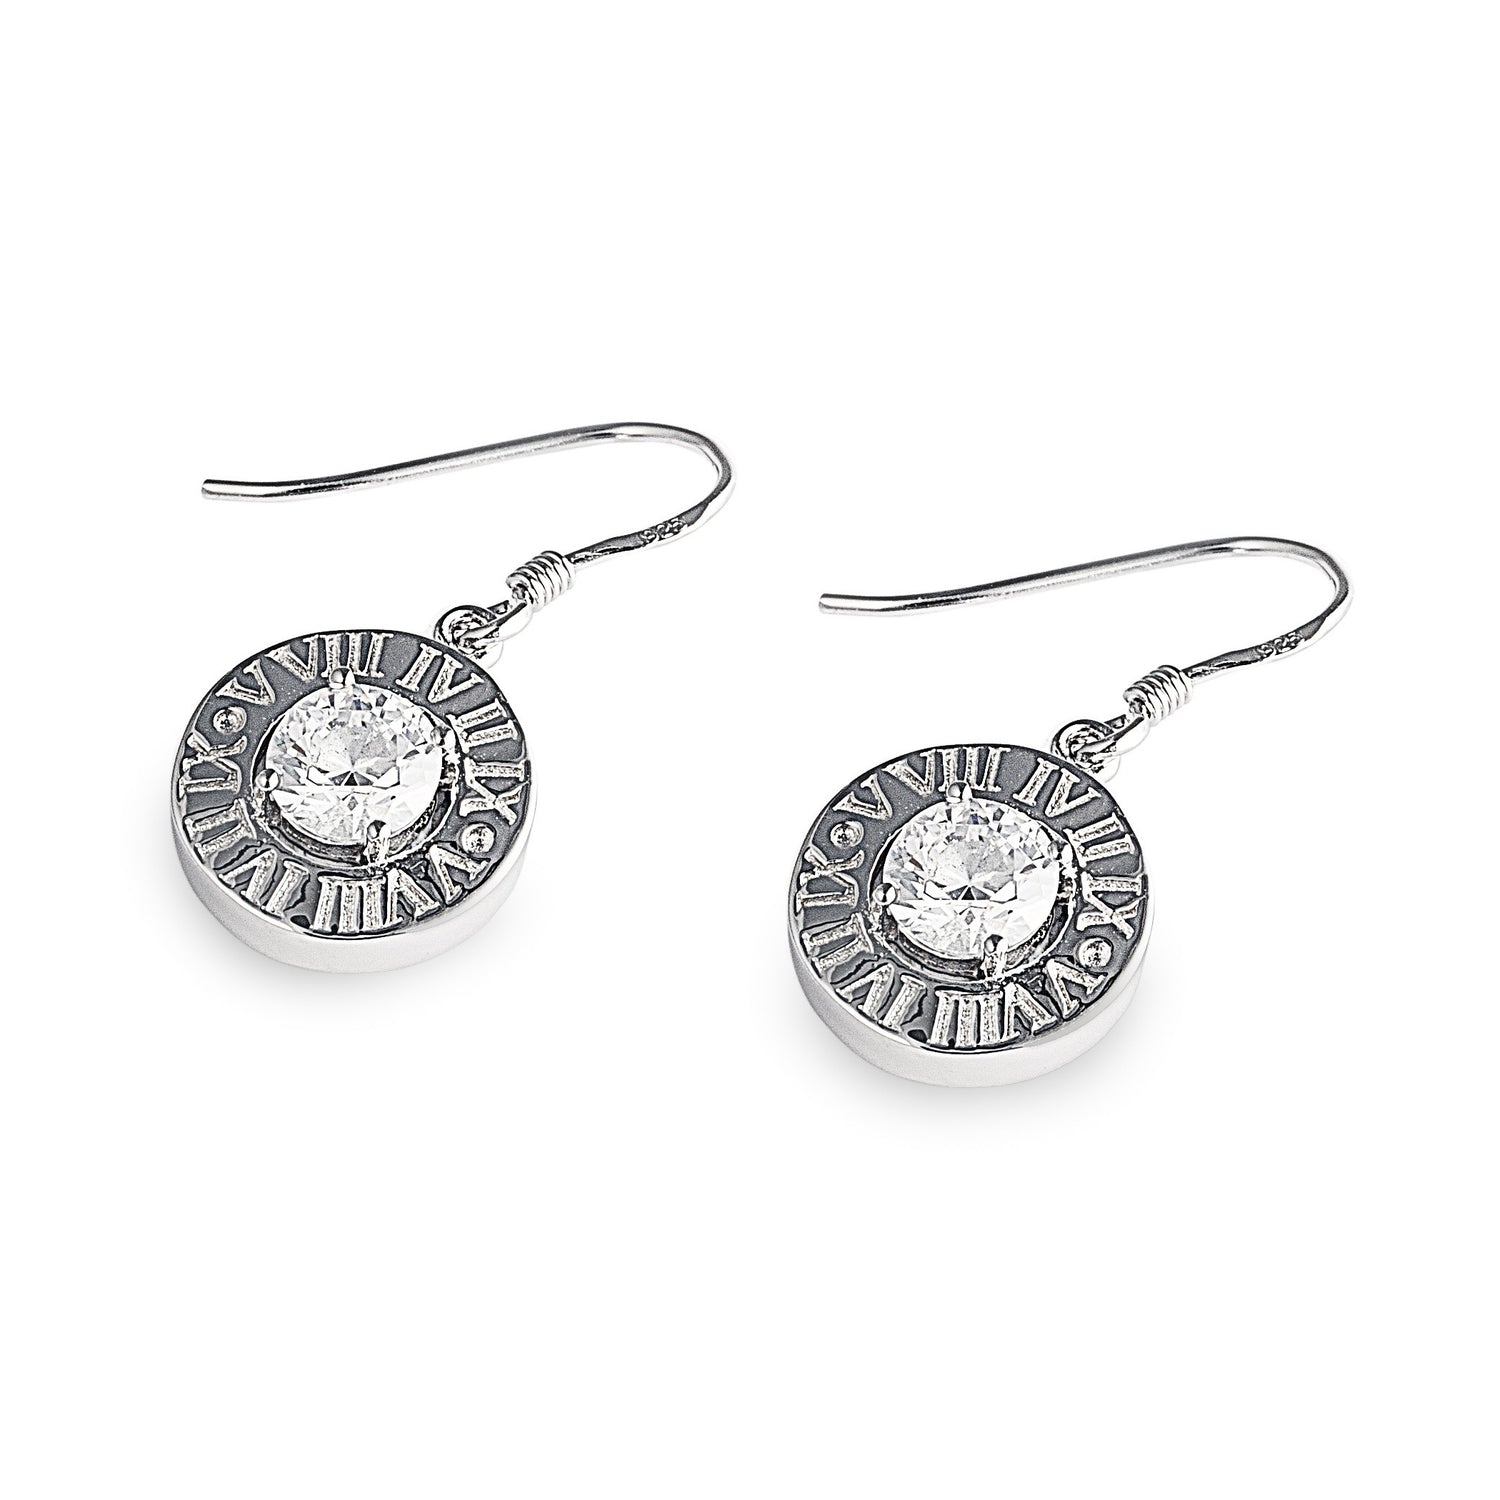 Eden Stone Drop Earrings in 925 sterling silver with stunning 2-carat cubic zirconia stone surrounded by Roman Numerals. Matching rings and necklaces are available. Affordable luxury jewellery by Bellagio & Co. Worldwide shipping plus FREE shipping for orders over $150 in Australia.